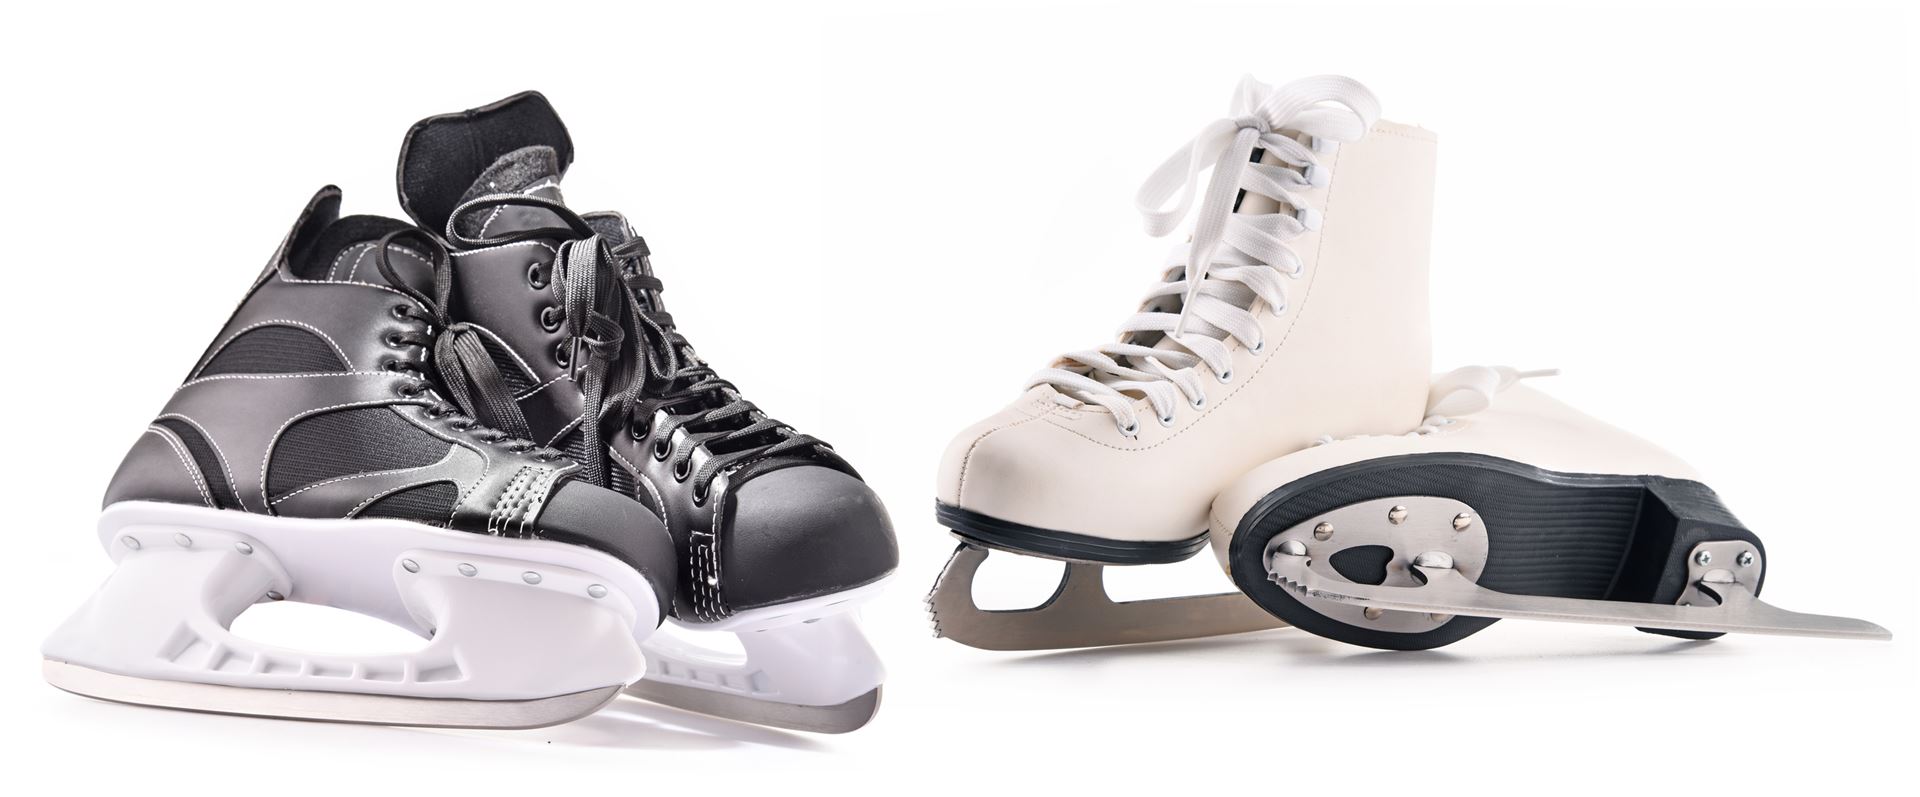 Picture for category Ice Skate Rentals